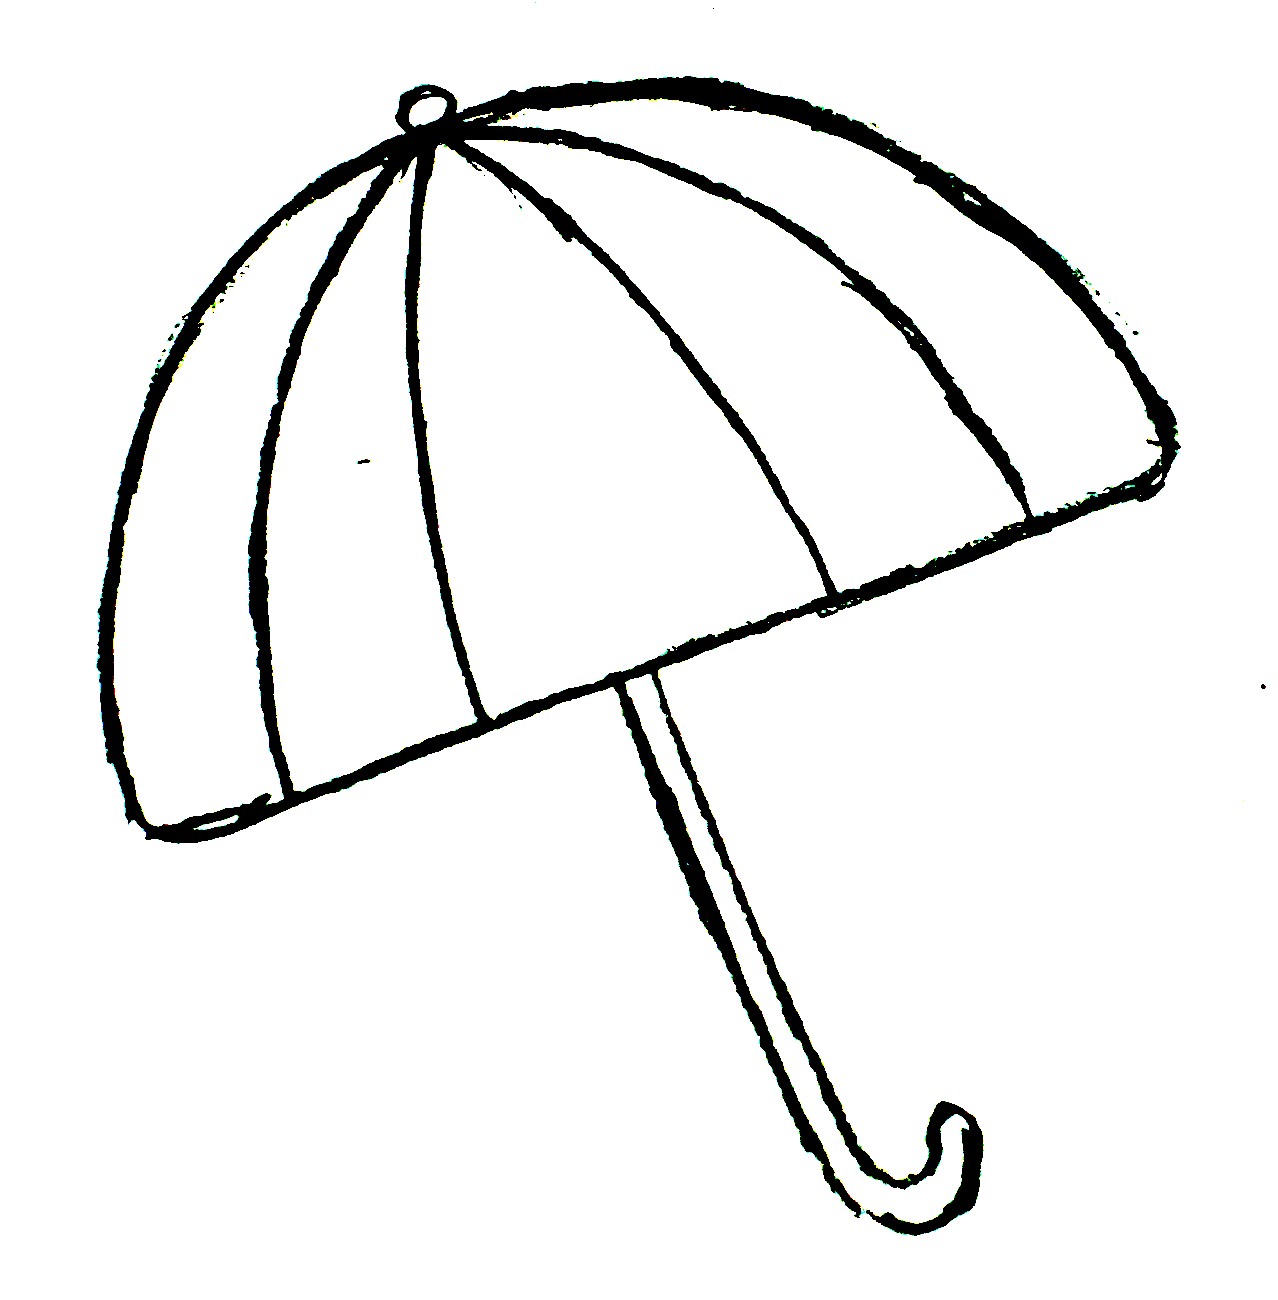 Umbrella coloring pages - Coloring Pages & Pictures - IMAGIXS